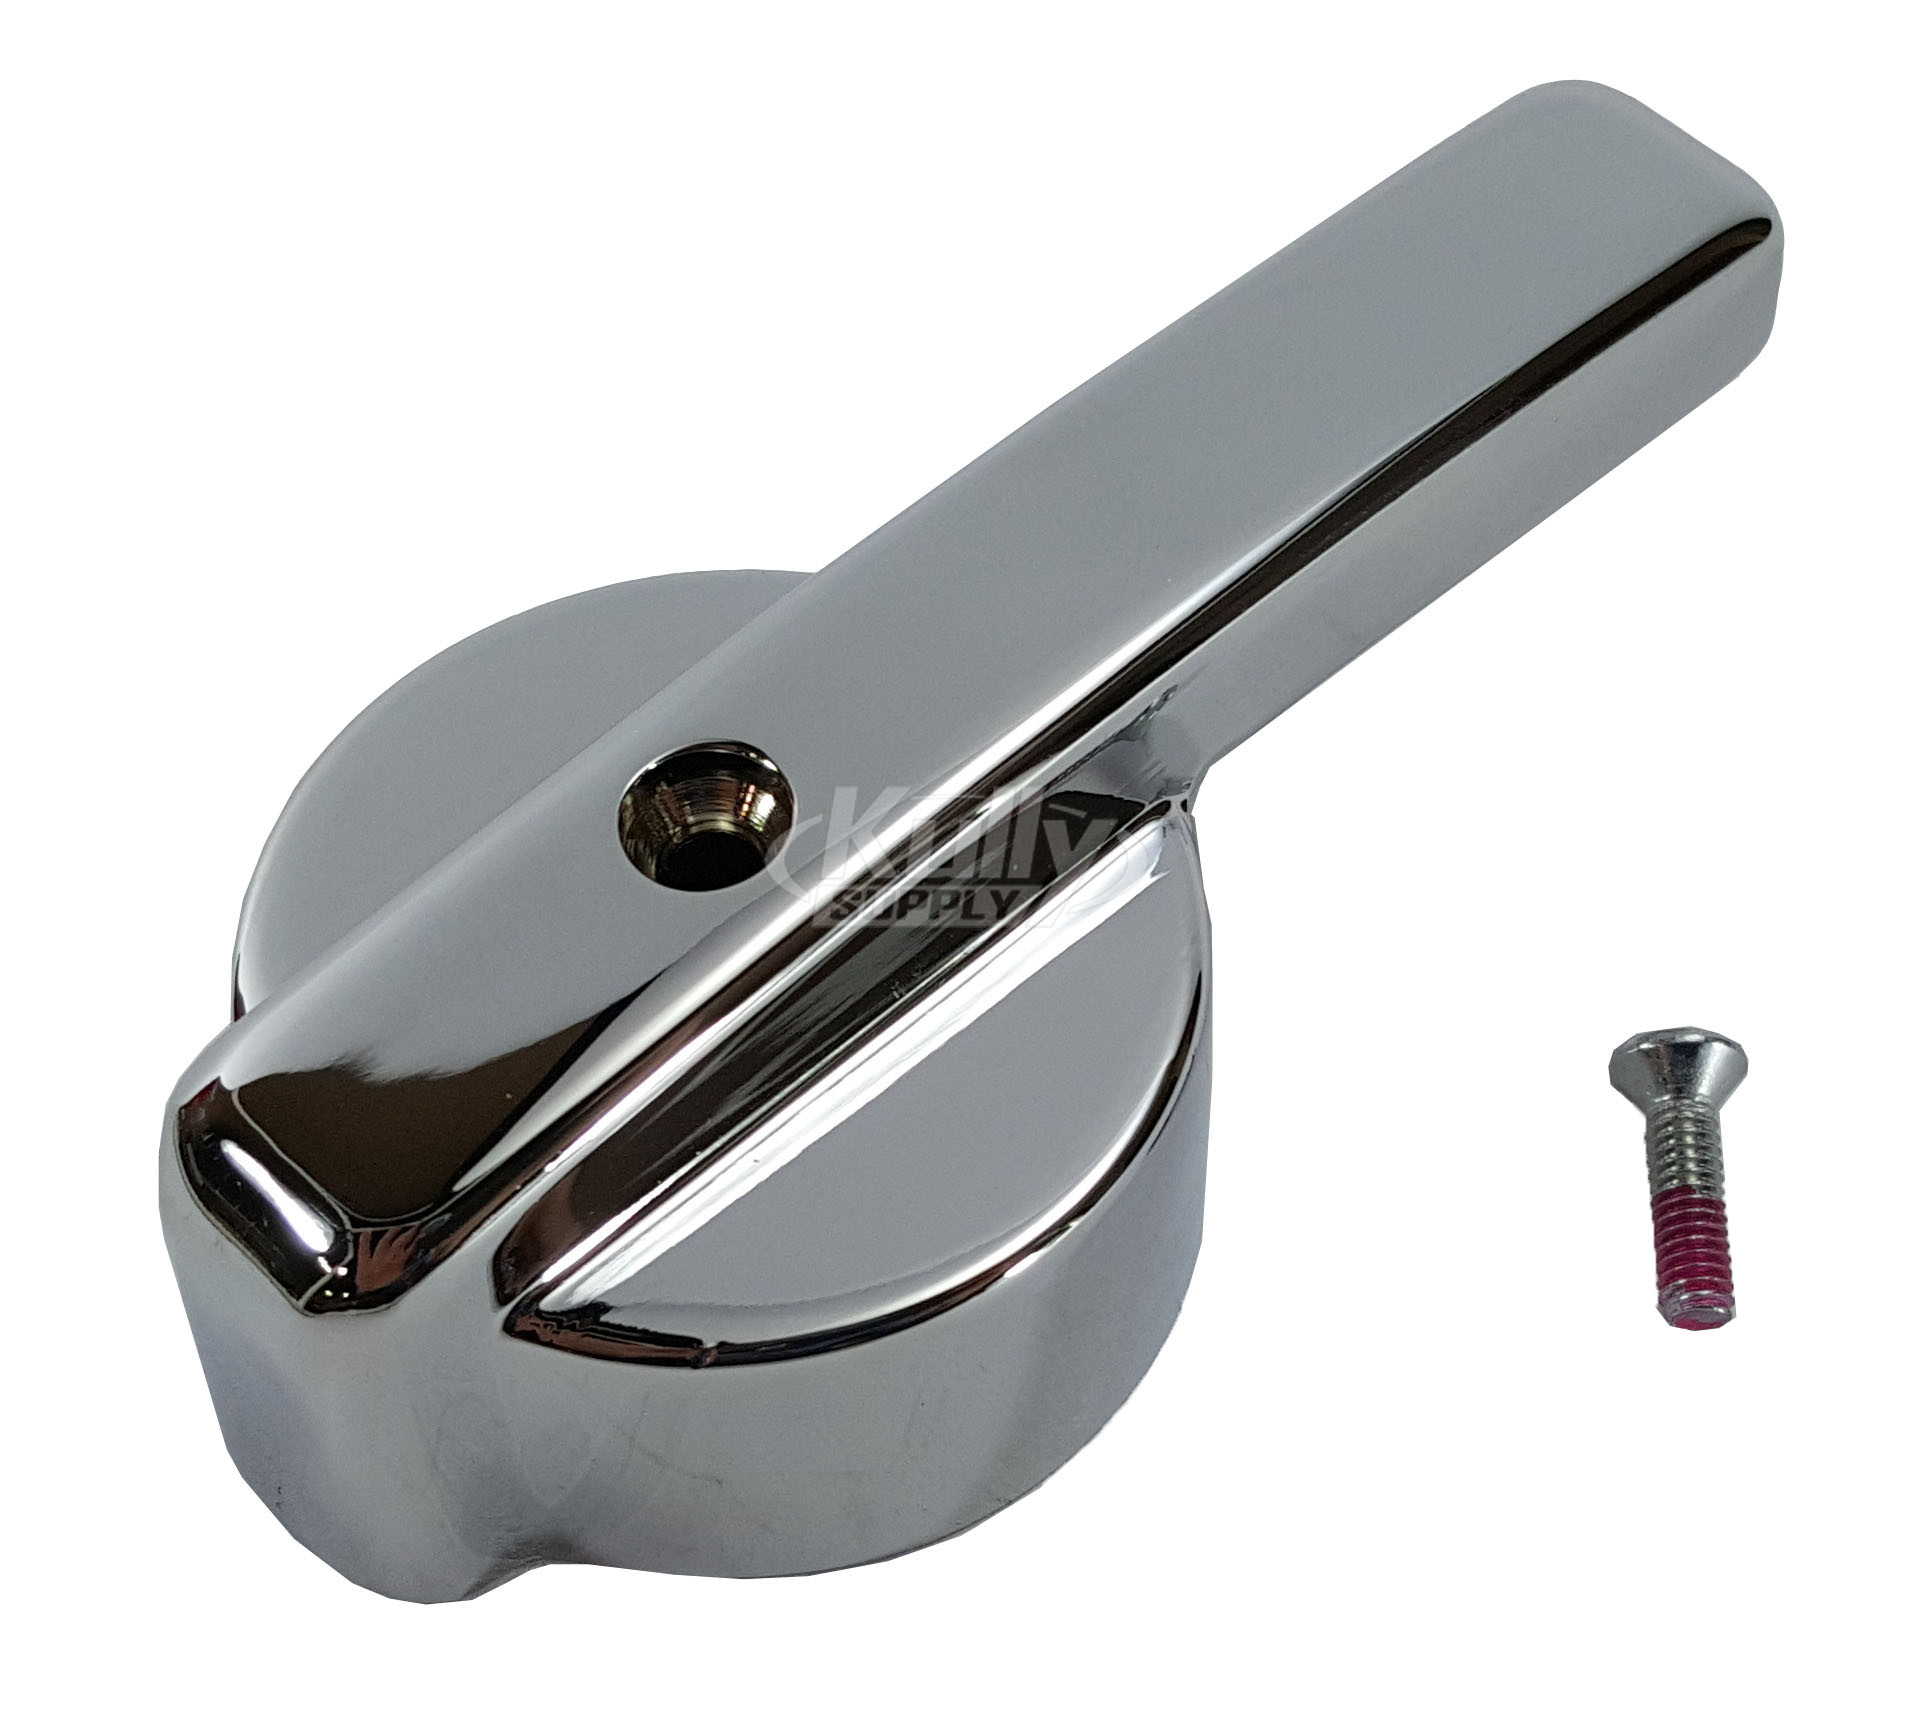 Powers 900-036 Lever Handle for Powers 900 Series